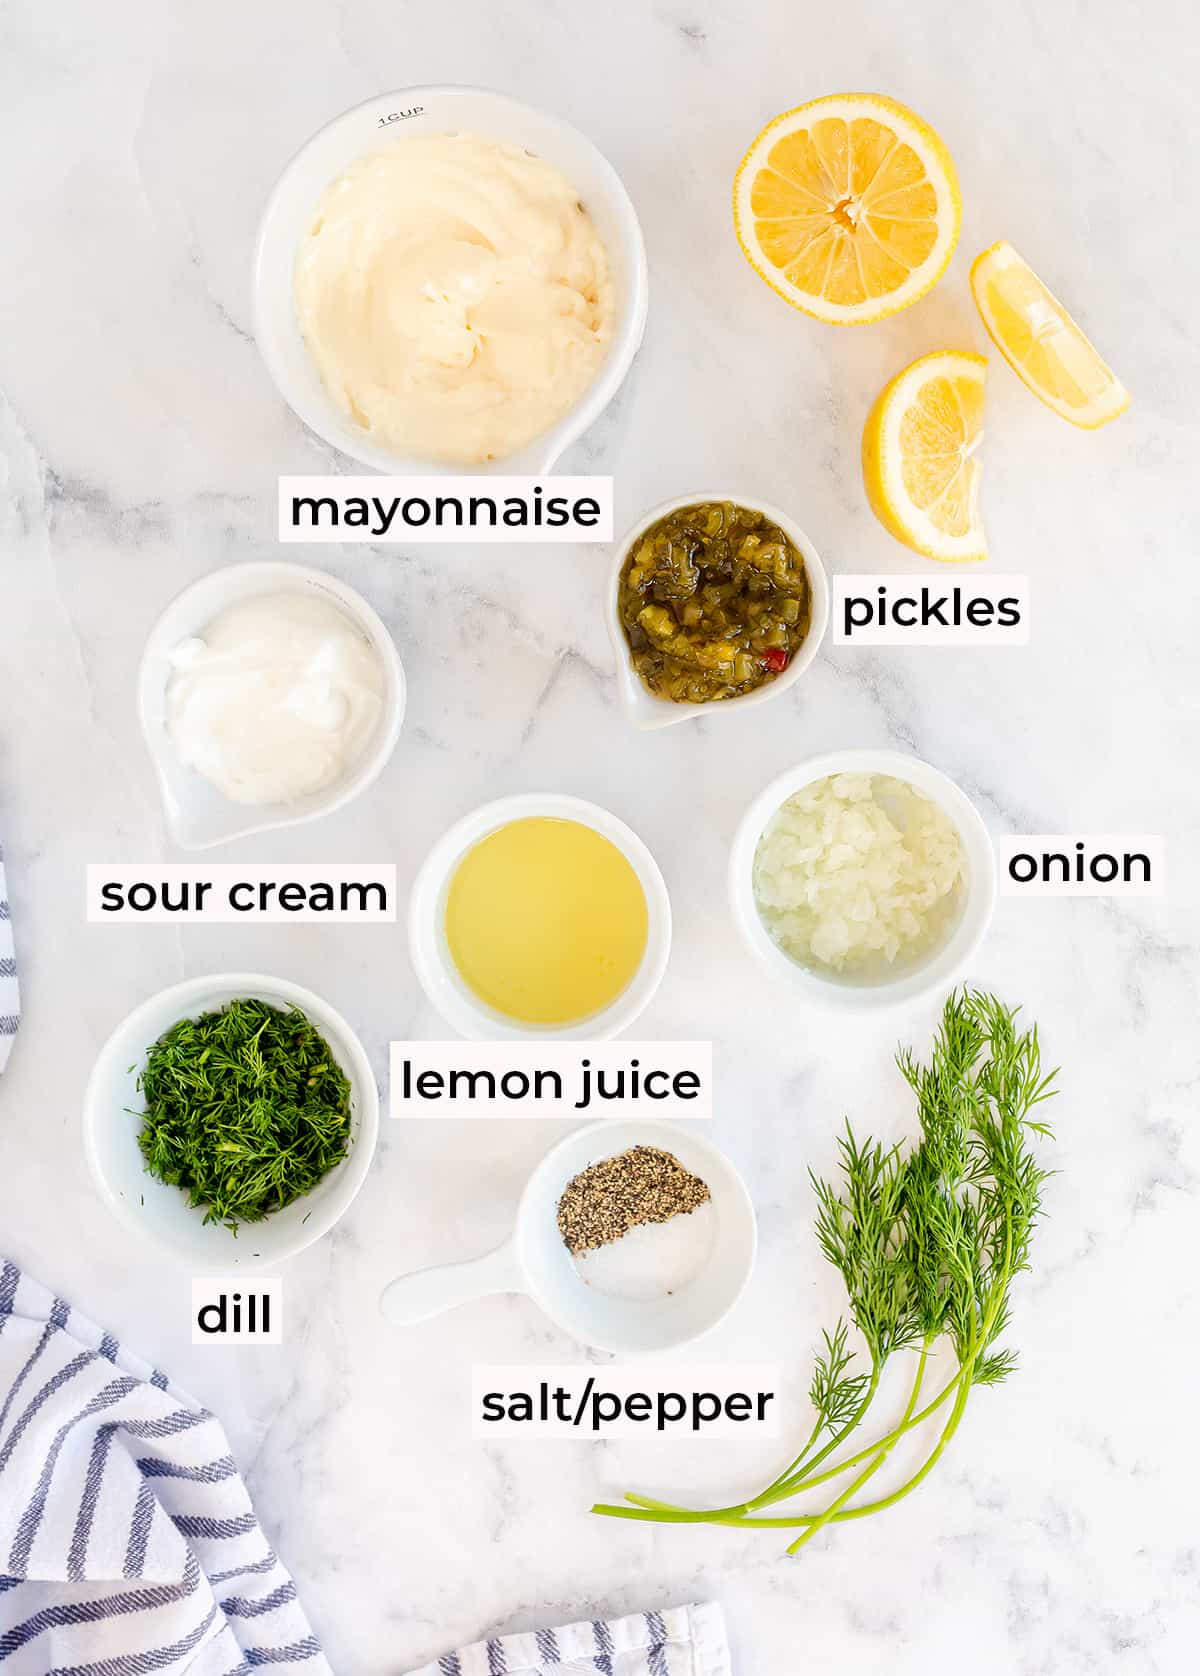 The ingredients for Homemade Tartar Sauce with text overlay.